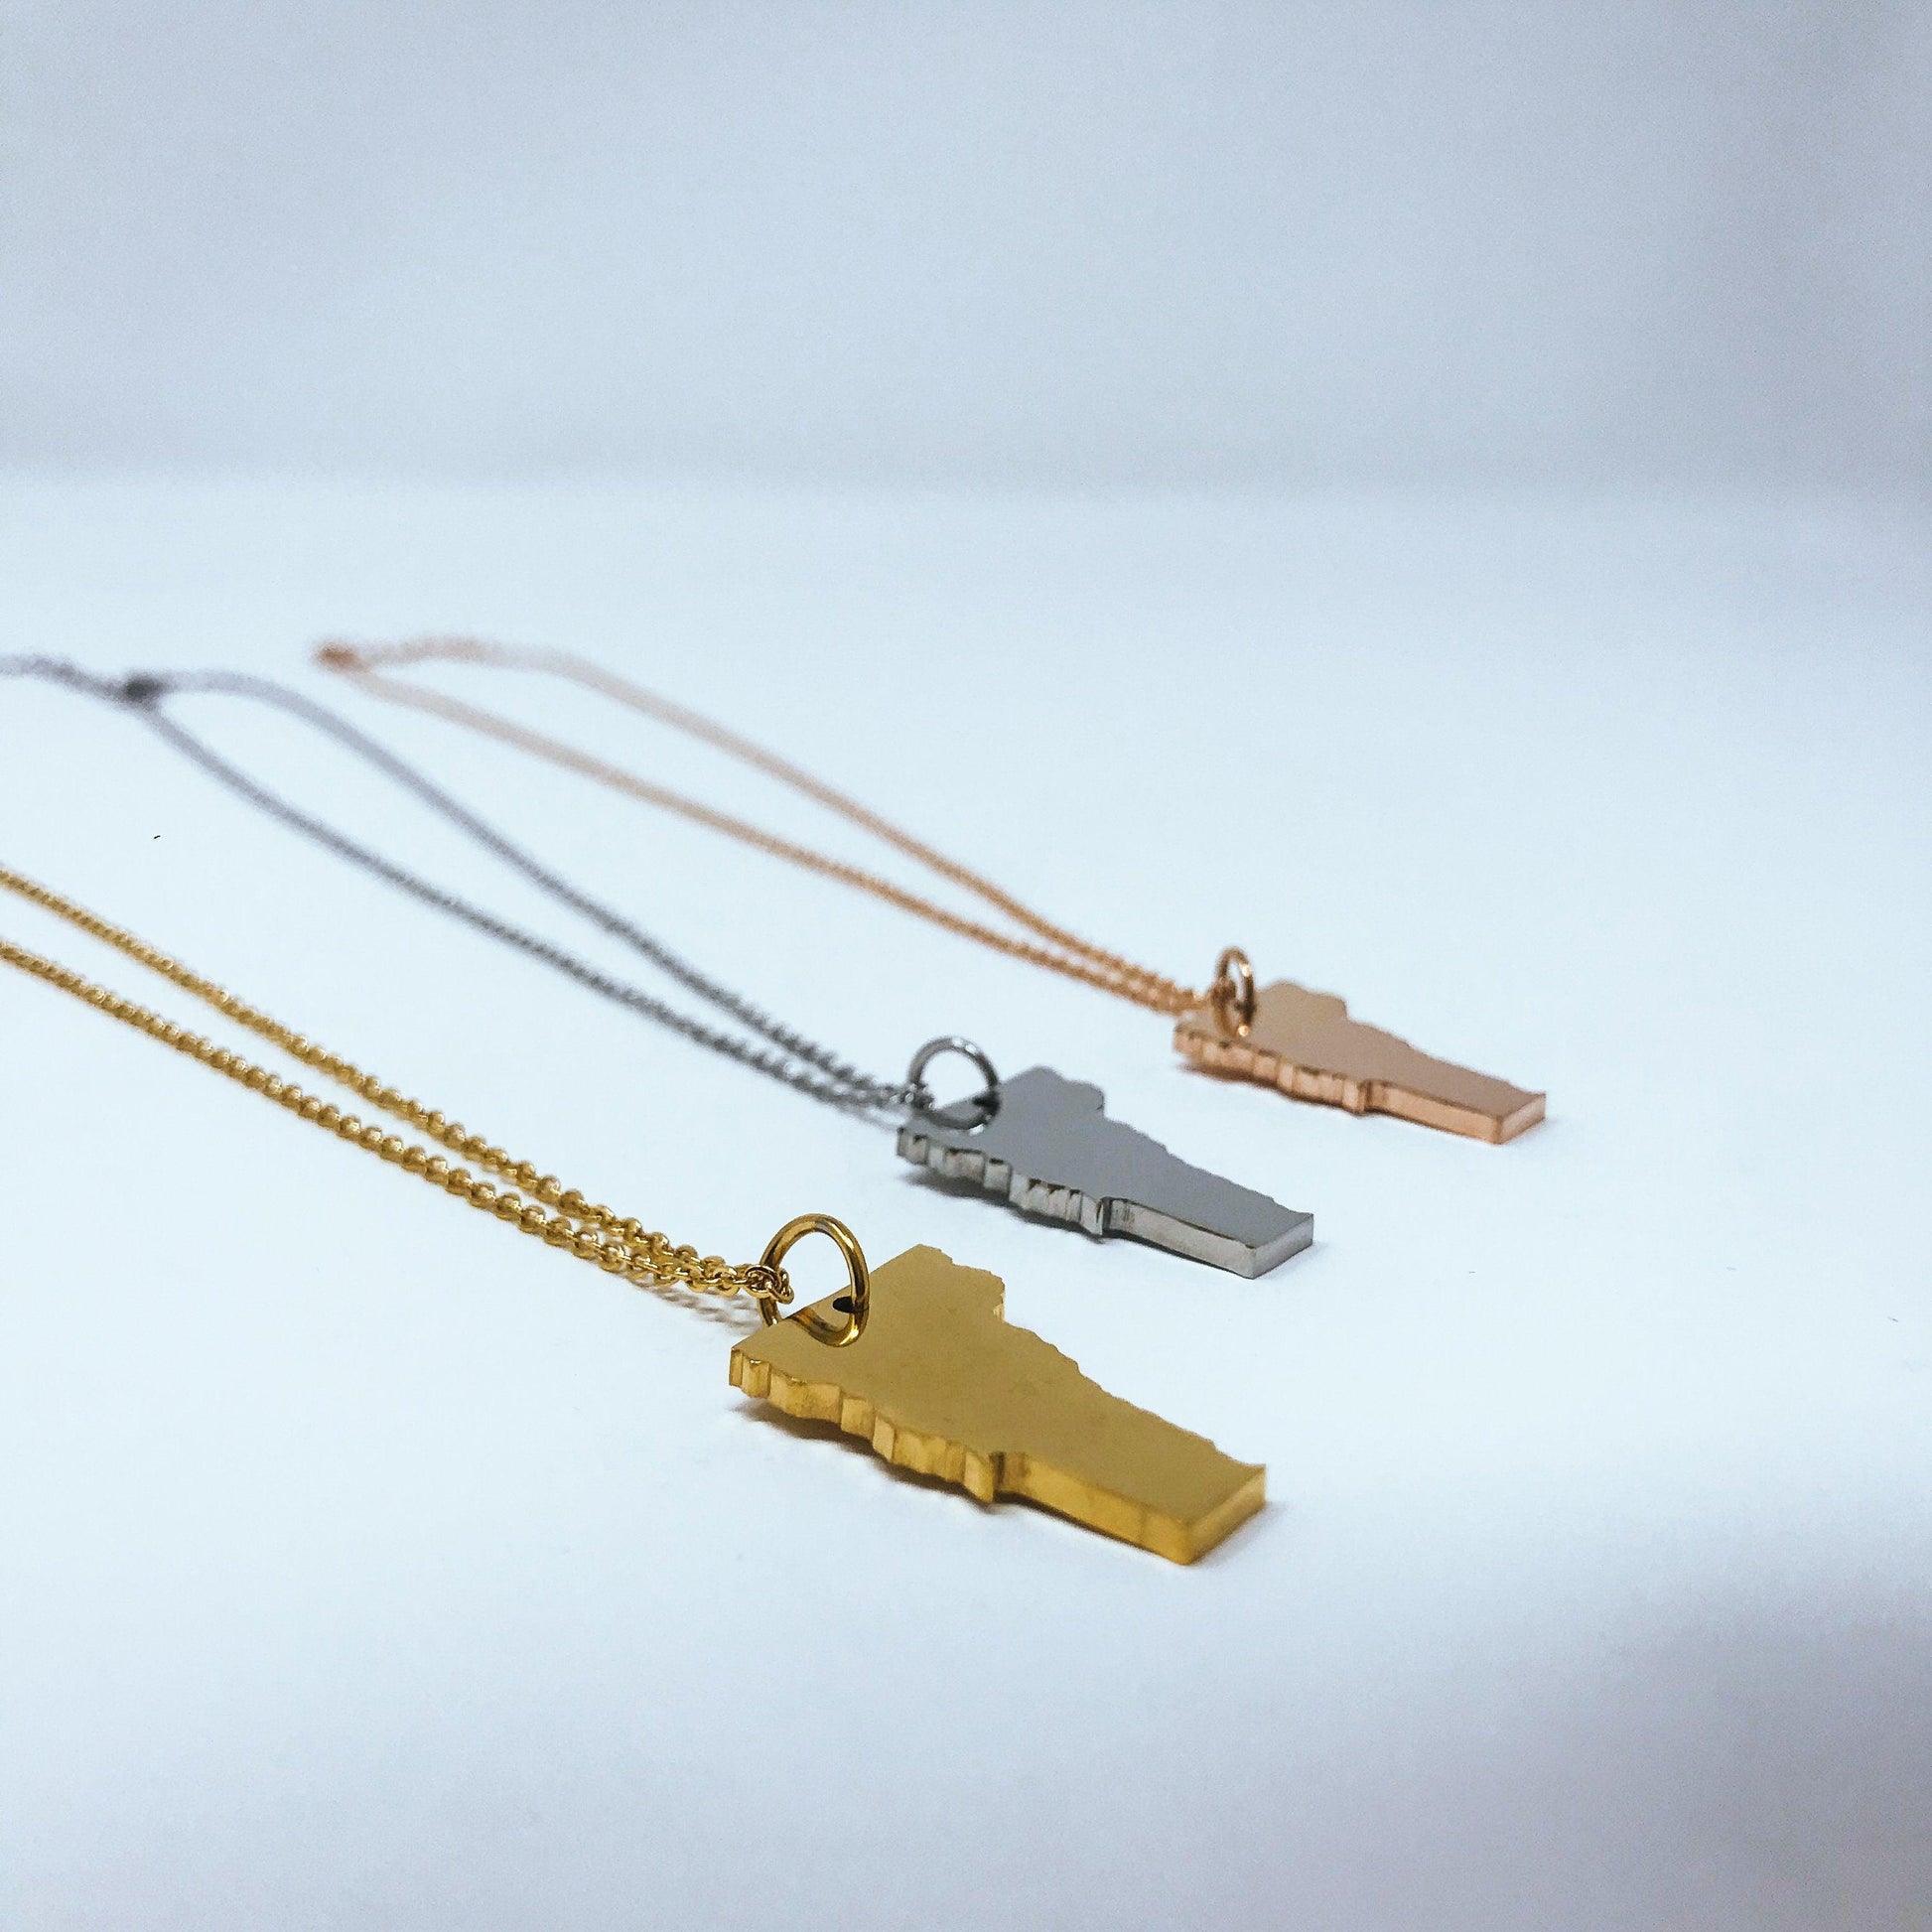 Vermont State Silhouette Necklaces in 3 different colors: Gold, Silver & Rose Gold